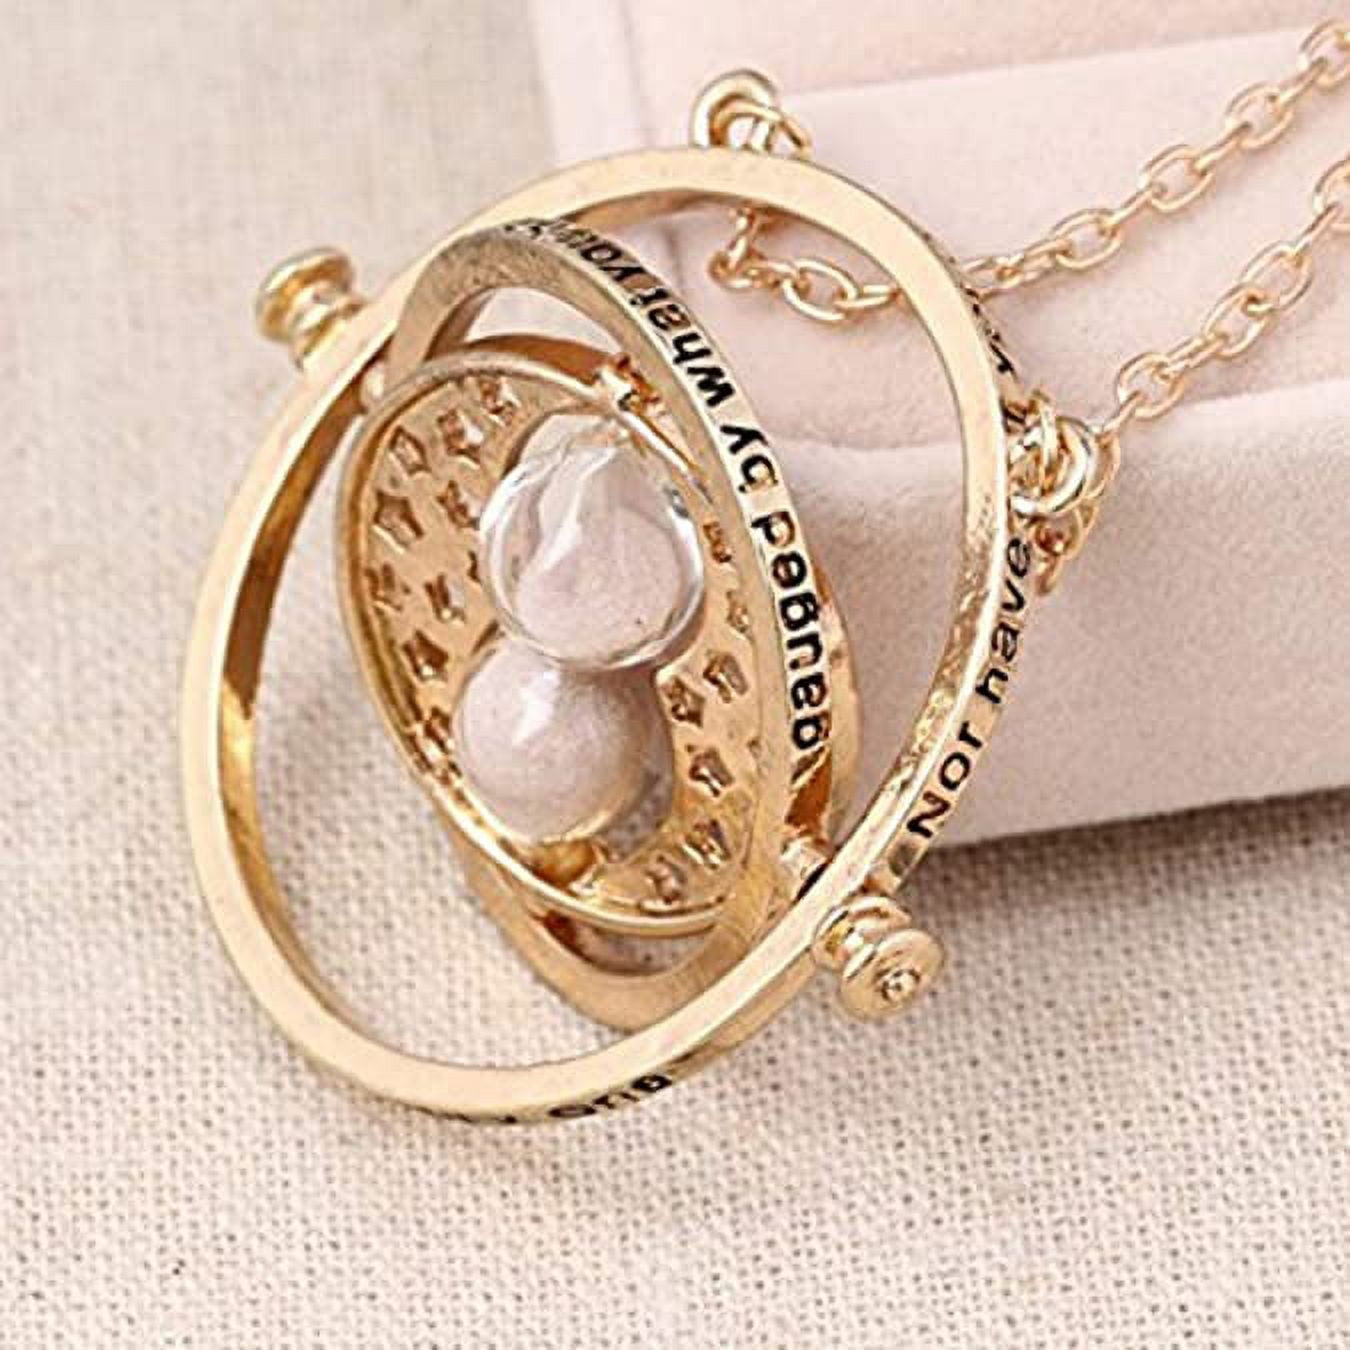 Buy JAZLOG Harry Potter Time Turner Necklace Hermione Granger Rotating  Spins Gold Hourglass | (White Sand) Online at Low Prices in India -  Amazon.in